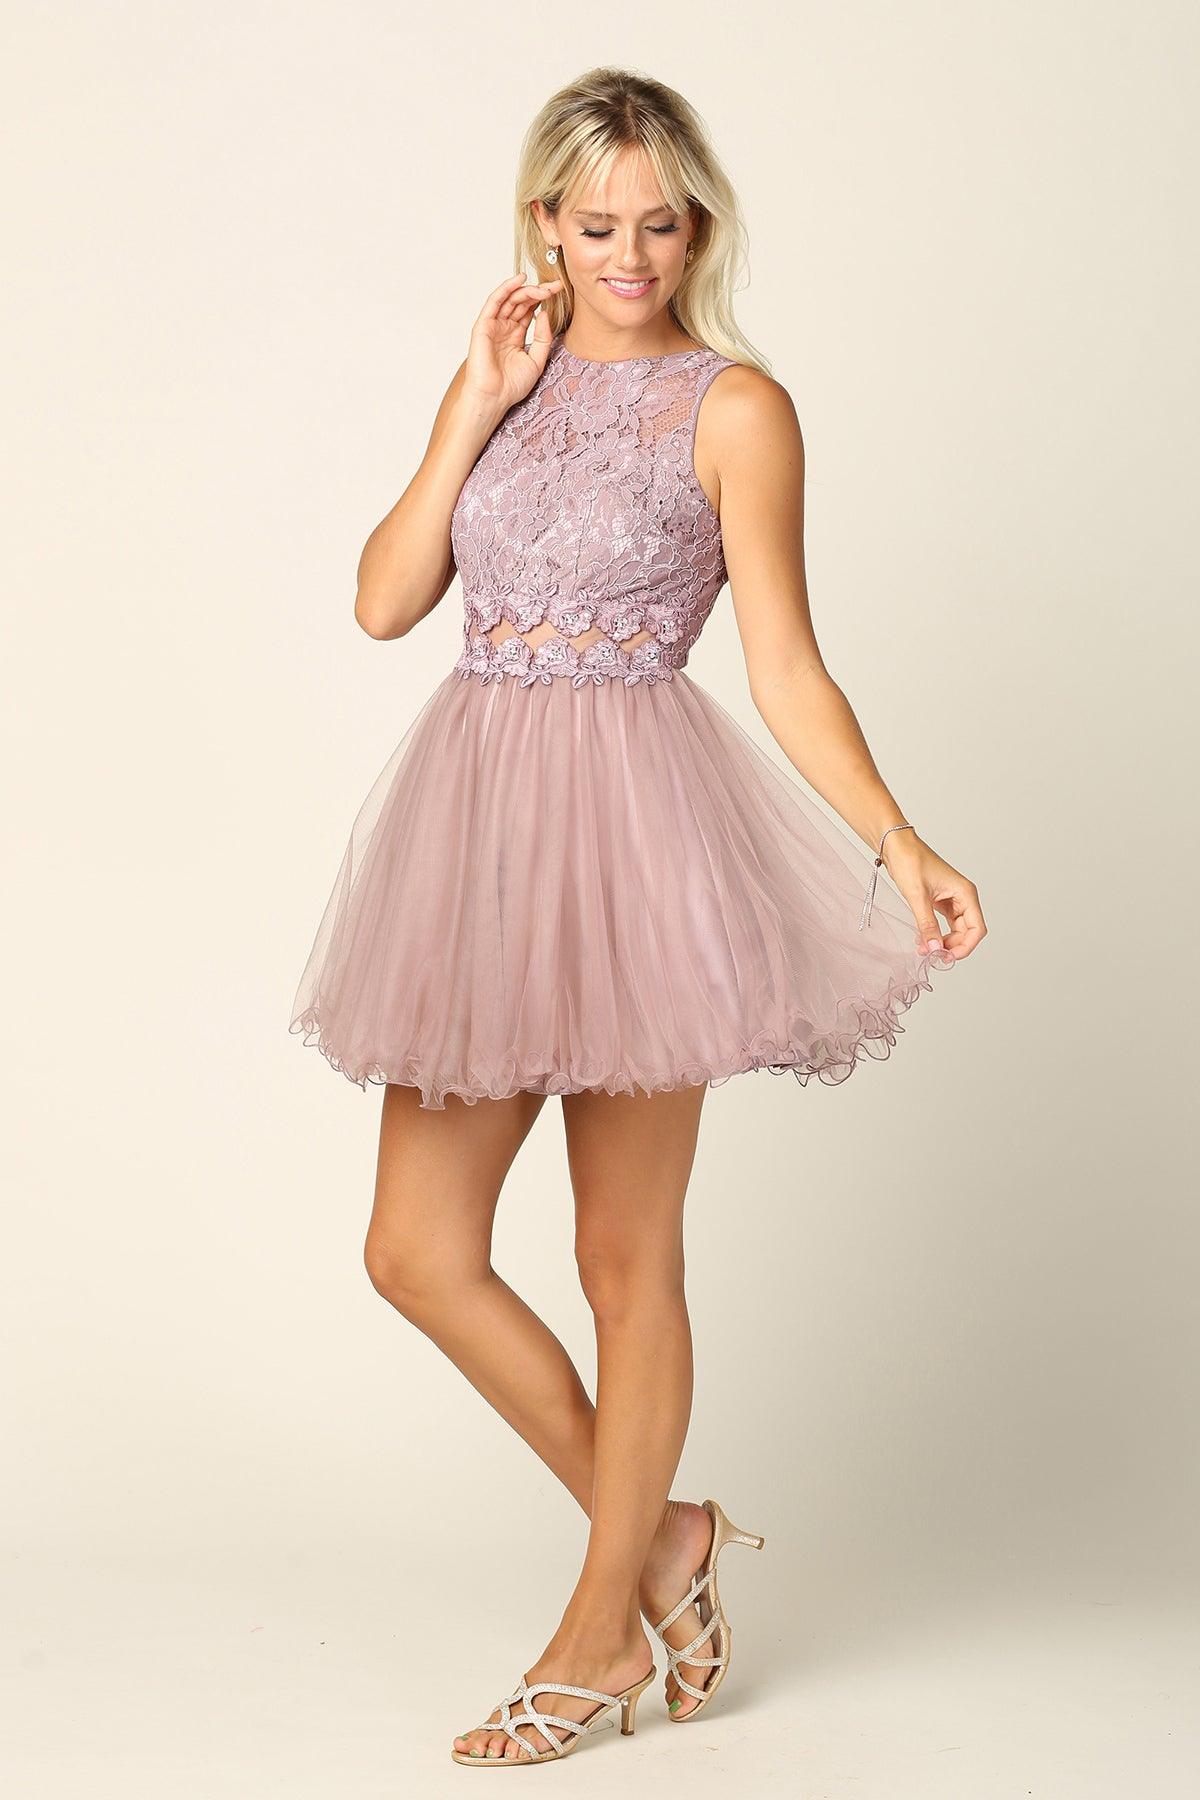 Short Prom Sleeveless Lace Cocktail Party Dress - The Dress Outlet